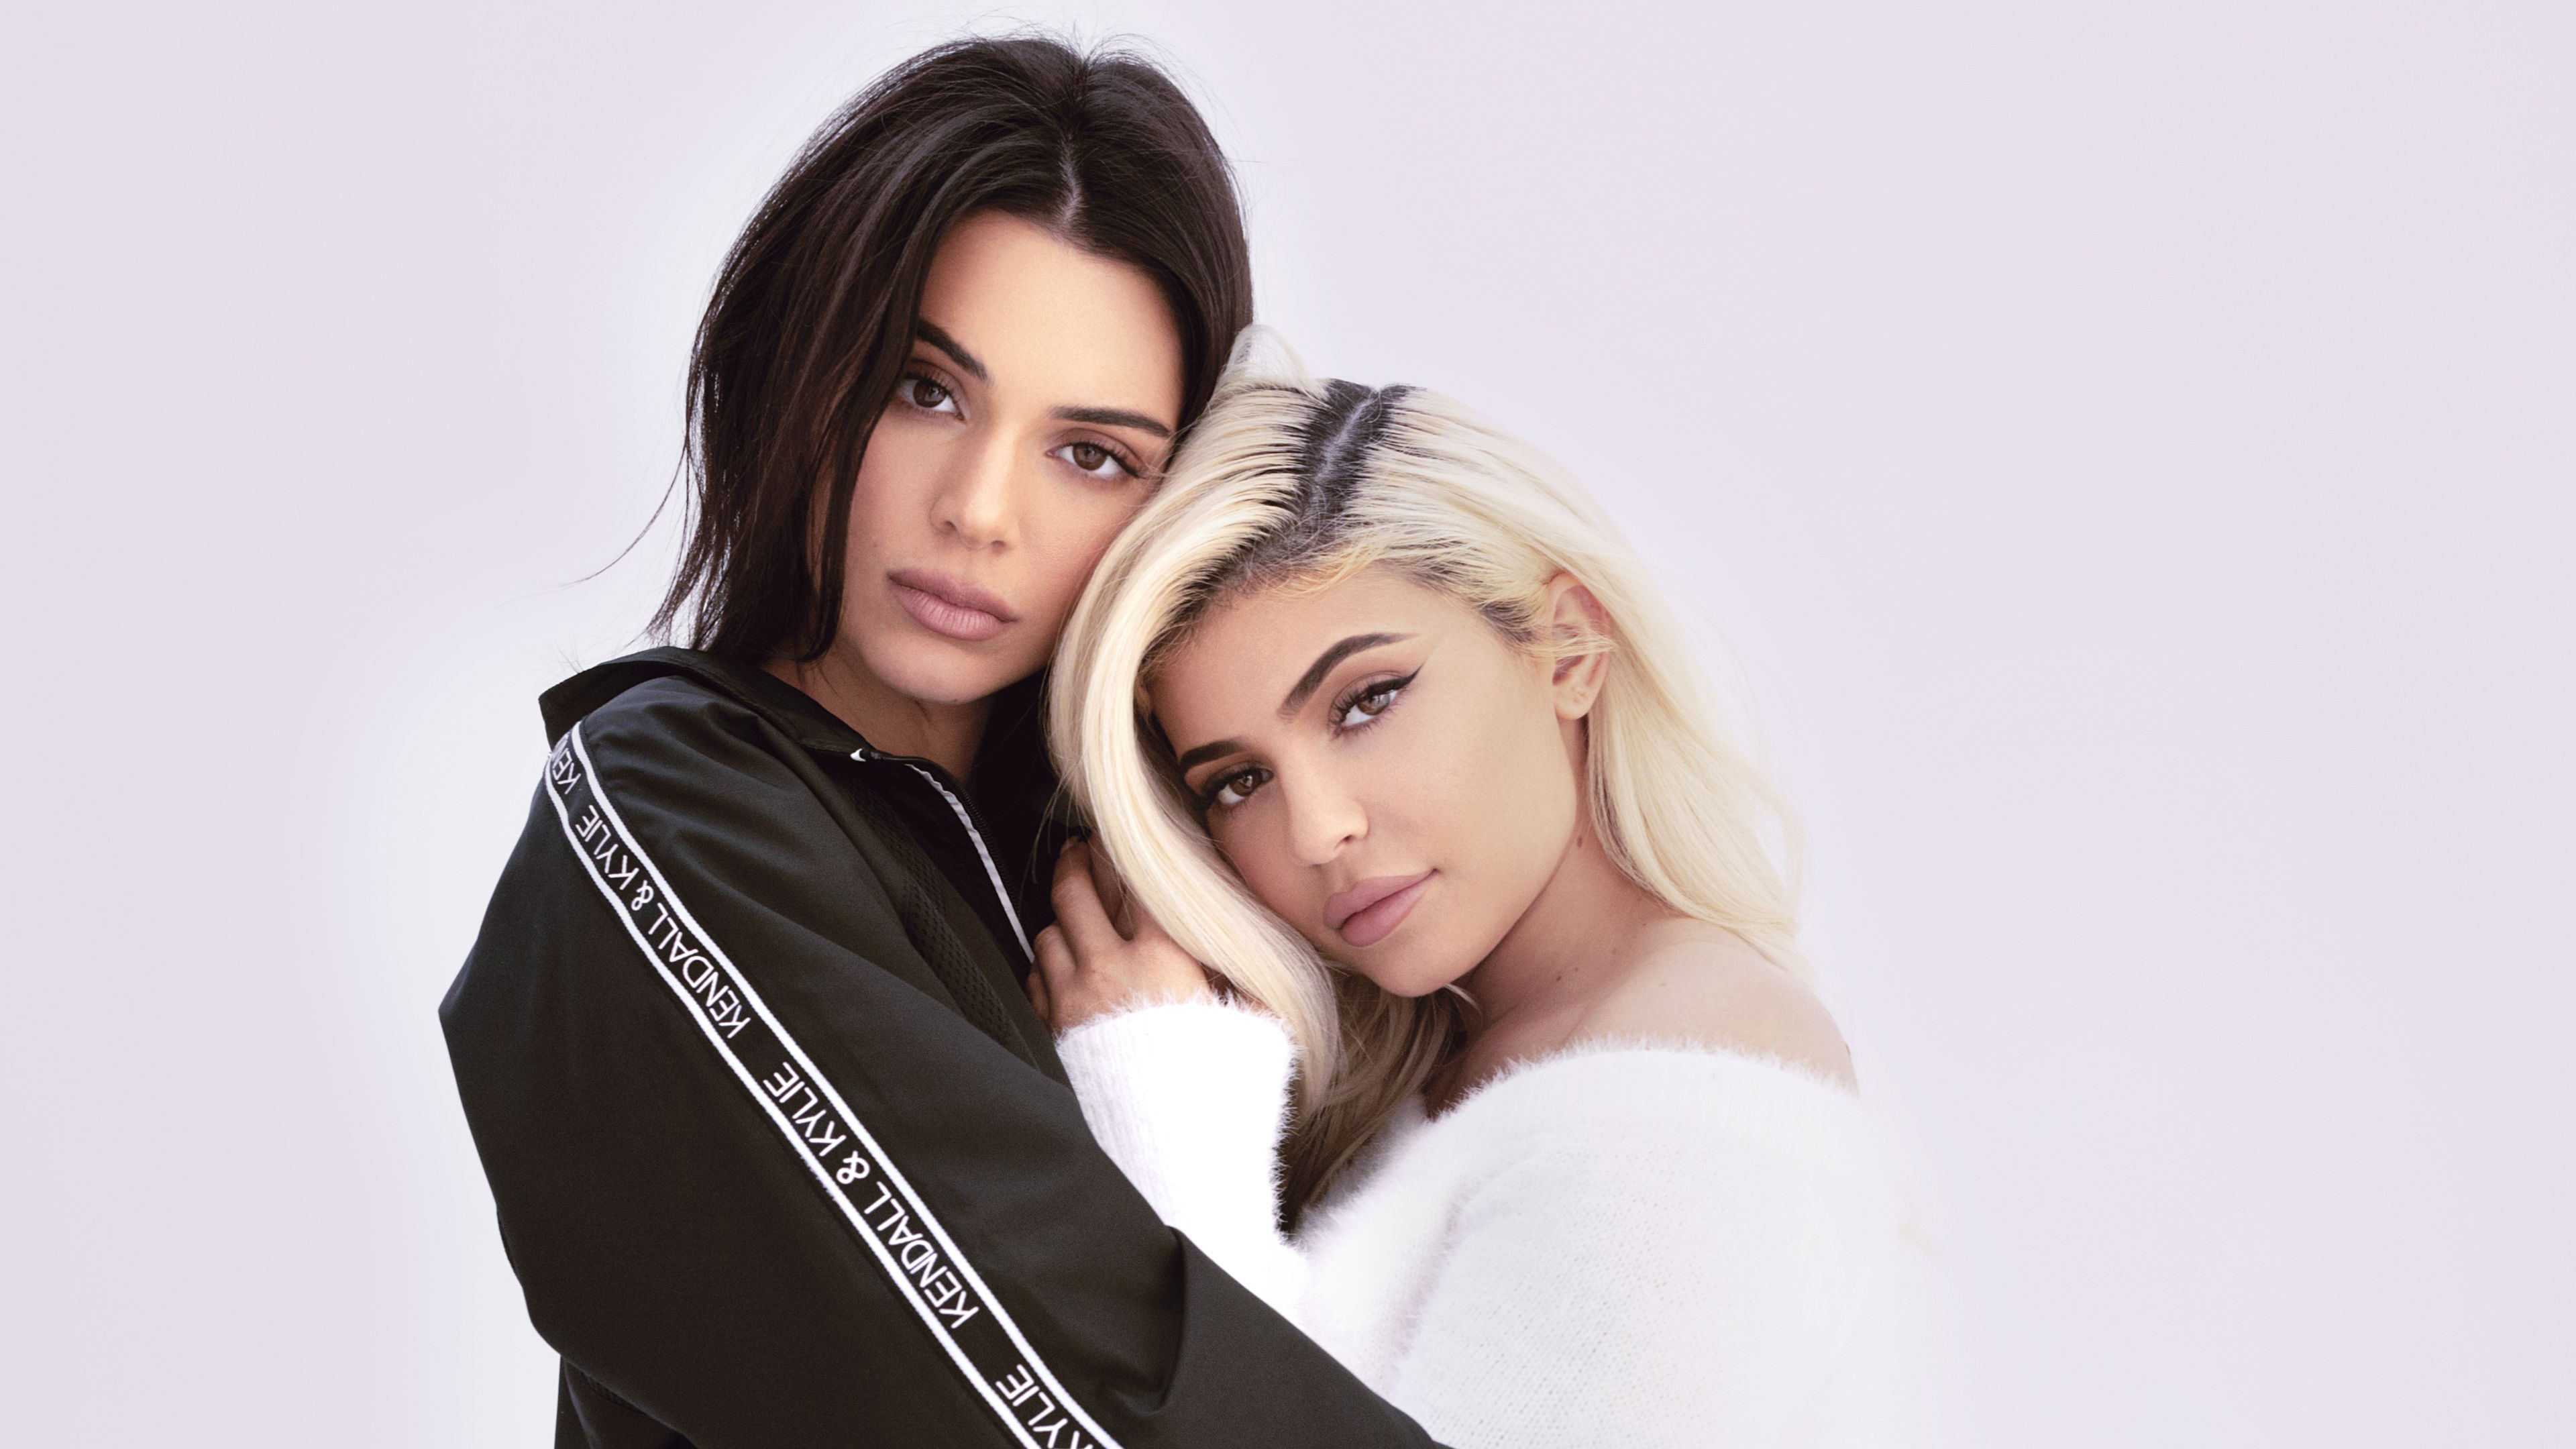 Kylie And Kendall Jenner 4k HD Celebrities Wallpaper Image